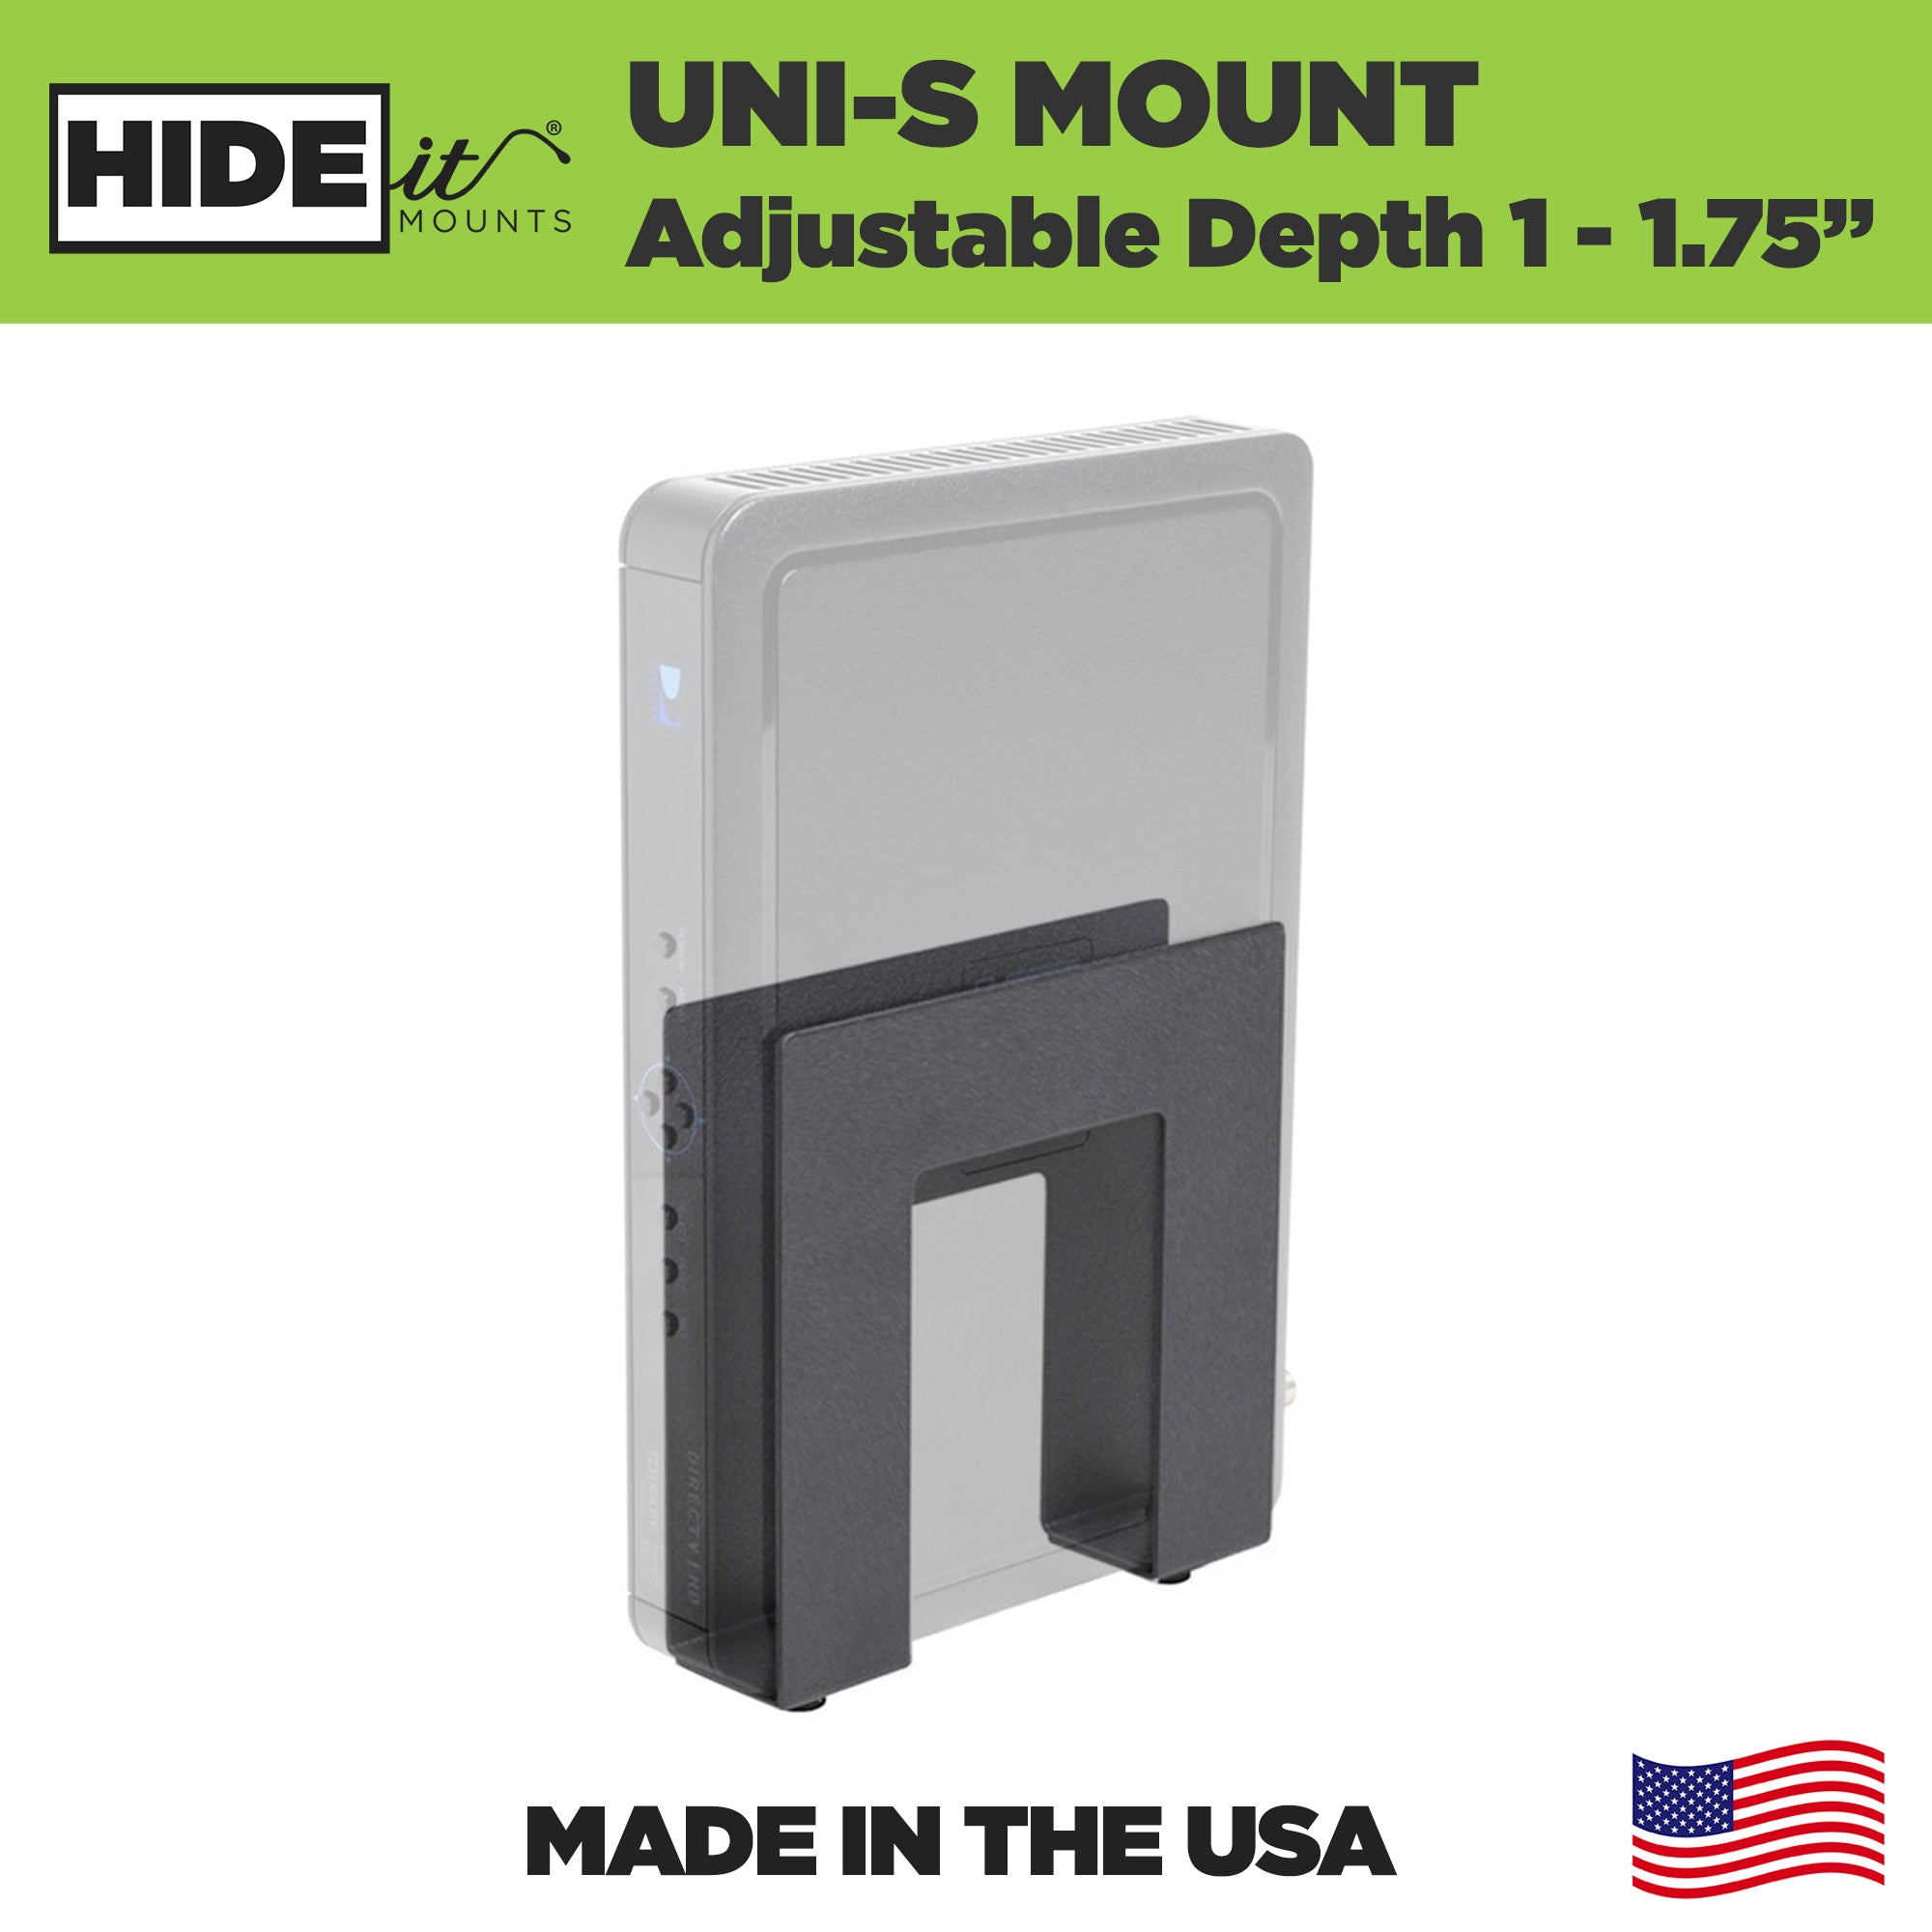 W - HIDEit Uni-S | Adjustable Small Electronics, Cable Box Mount + Small Computer Mount